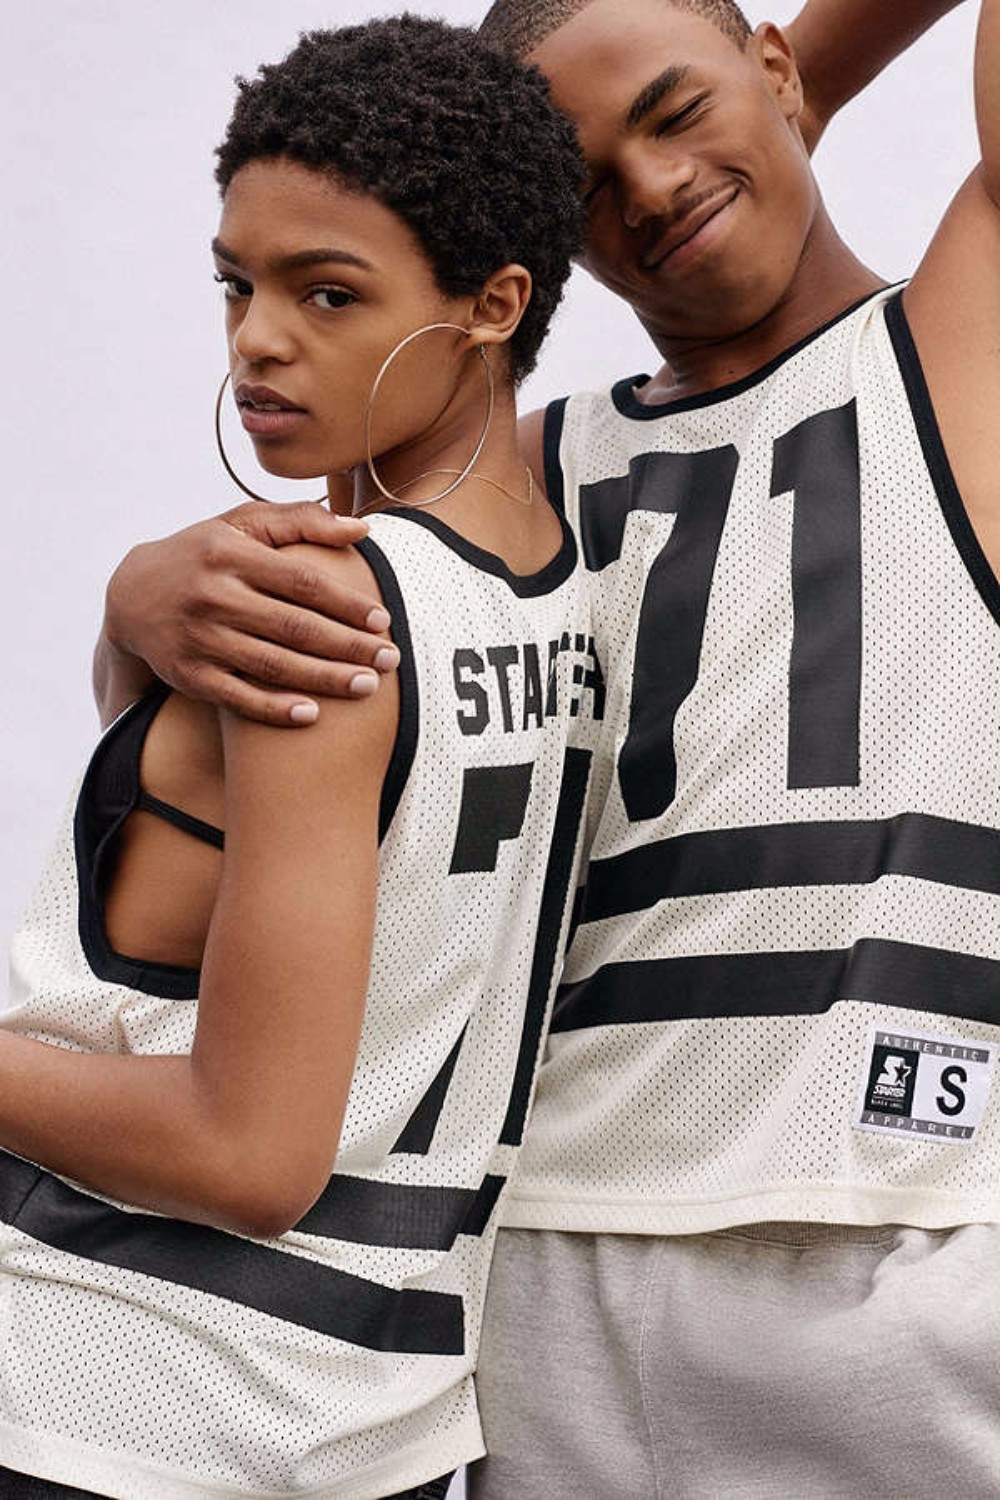 Selah and Joshua Marley Shine In Starter Black Label And Urban Outfitters